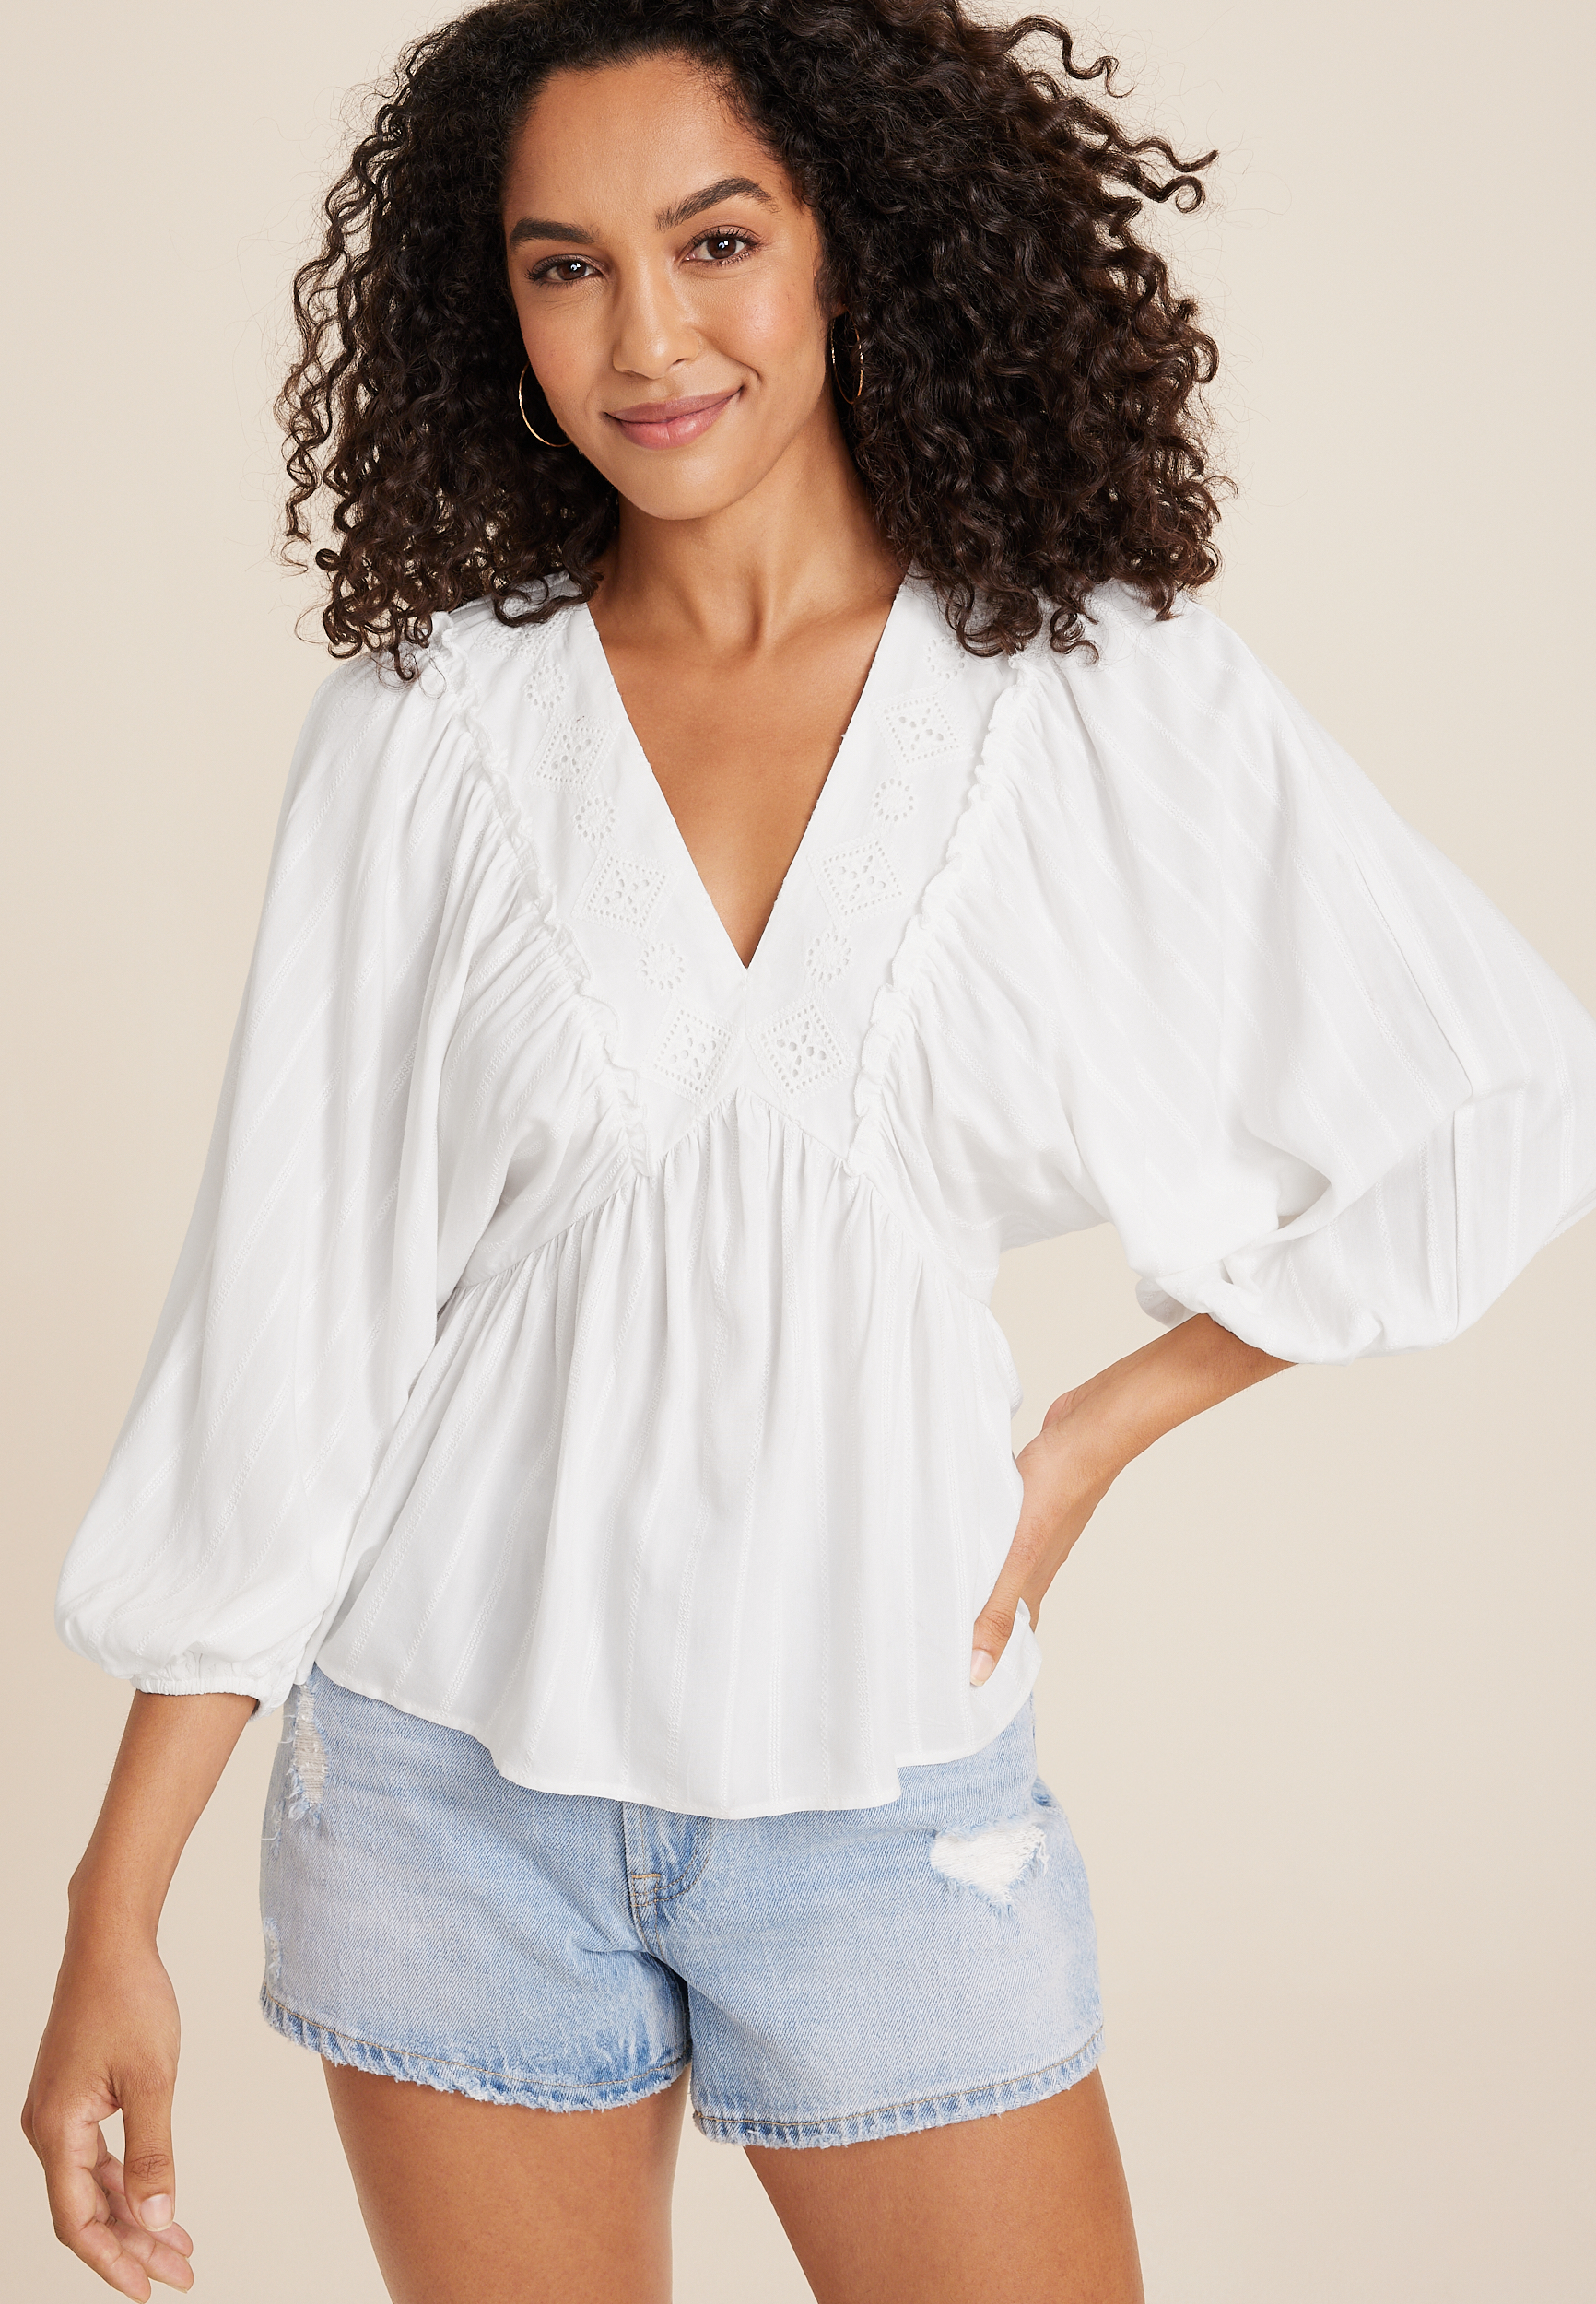 Women\'s Shirts & Blouses: maurices Peasant & Flowy, More Floral, 